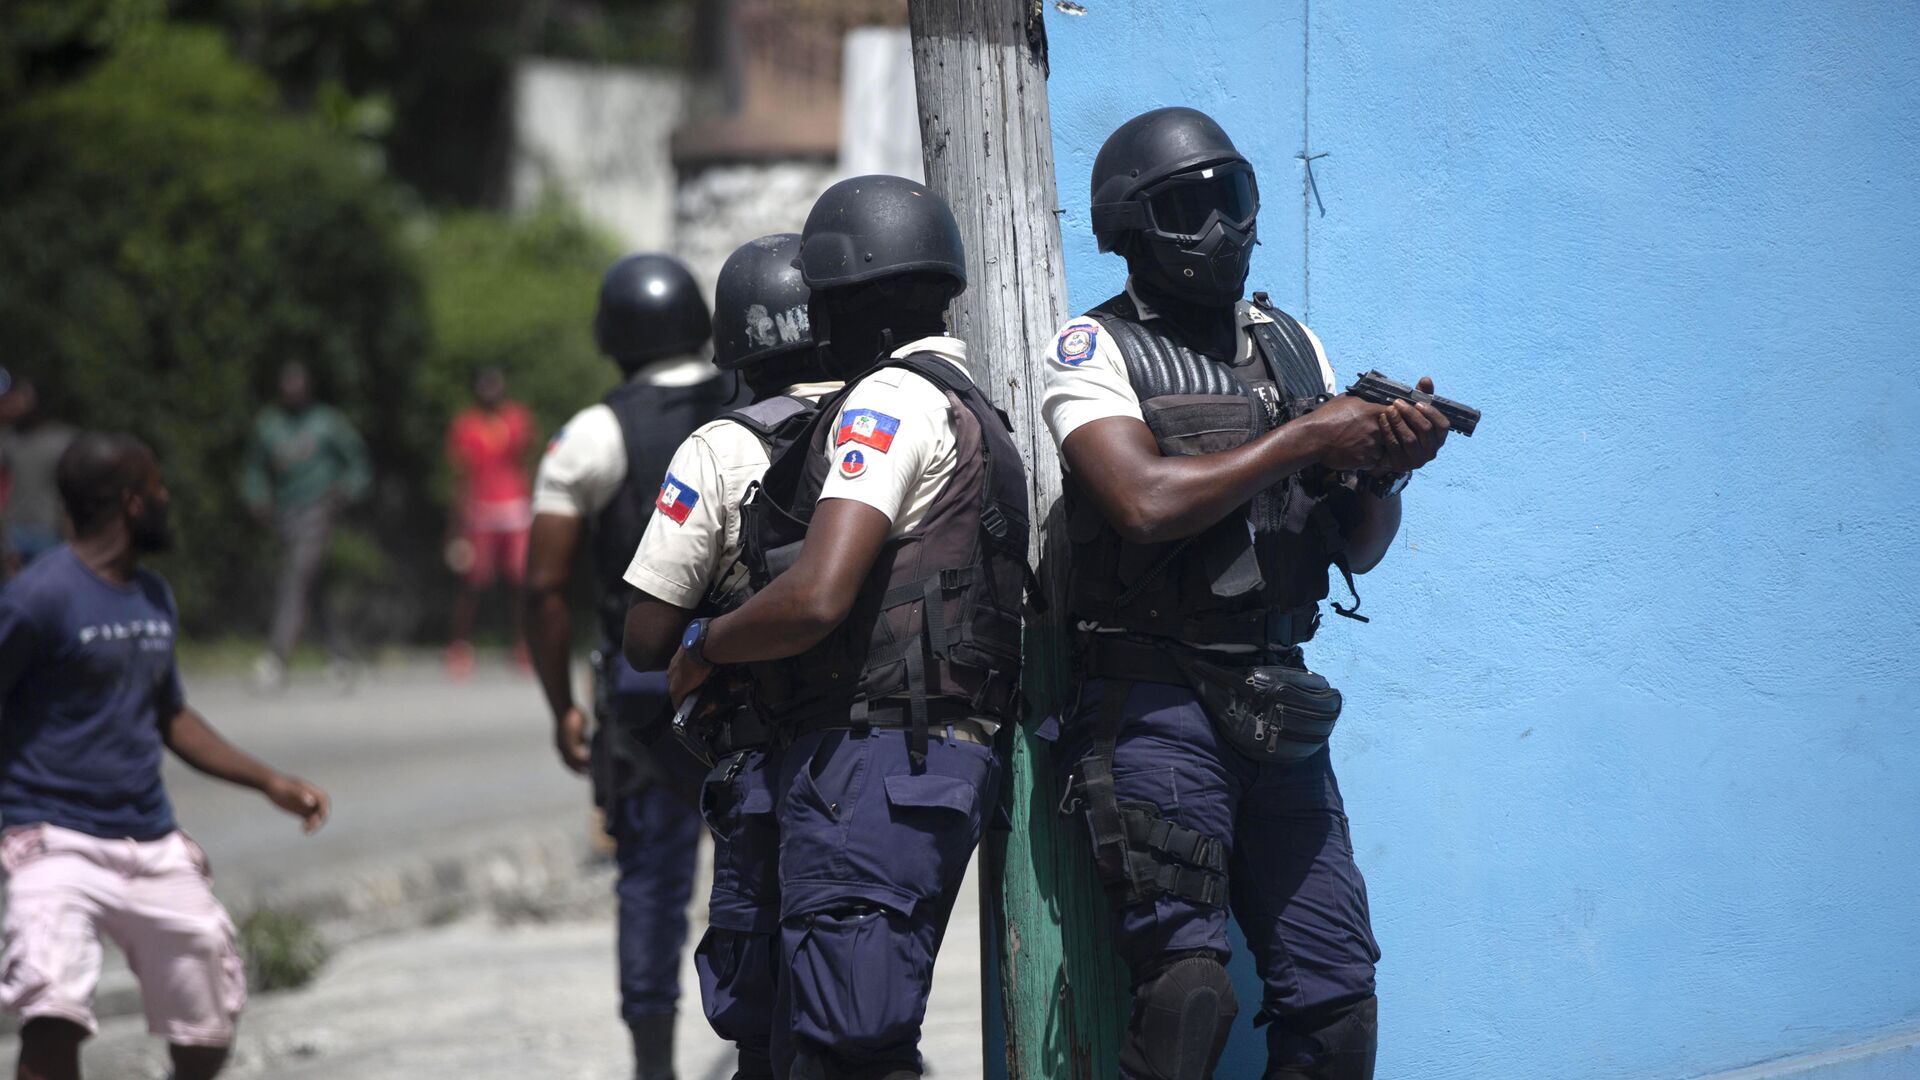 Police officers patrol in search for suspects in the murder Haiti's President Jovenel Moise, in Port-au-Prince, Haiti, Thursday, July 8, 2021. Moise was assassinated in an attack on his private residence early Wednesday. - Sputnik International, 1920, 07.01.2022